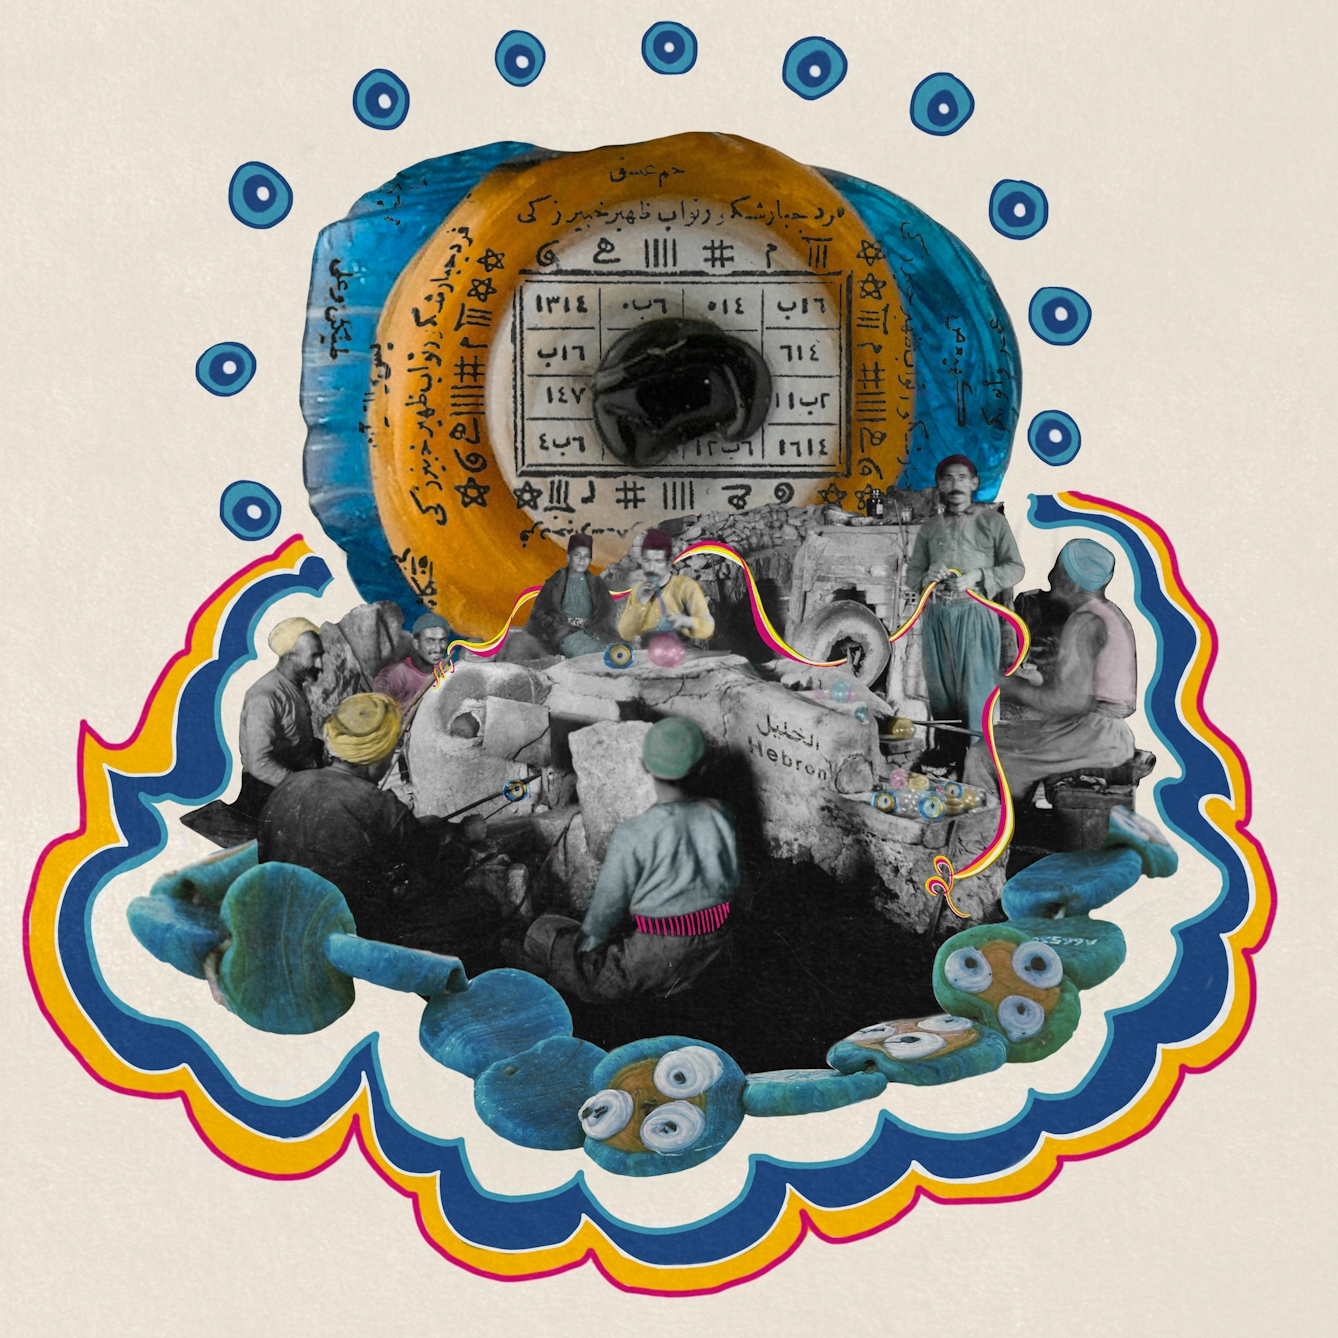 Digital collaged artwork using black and white archive imagery and over-drawn colourful graphical elements. The artwork shows an archive image of a group of men in the process of glass making and glass blowing. They are seated round a wall with the word 'Hebron' written on it.Encircling them is an evil eyed amulet necklace. Surrounding this are ribboned patterns which follow the lines of the necklace, made up of yellows and oranges. This is all set against a cream coloured background.